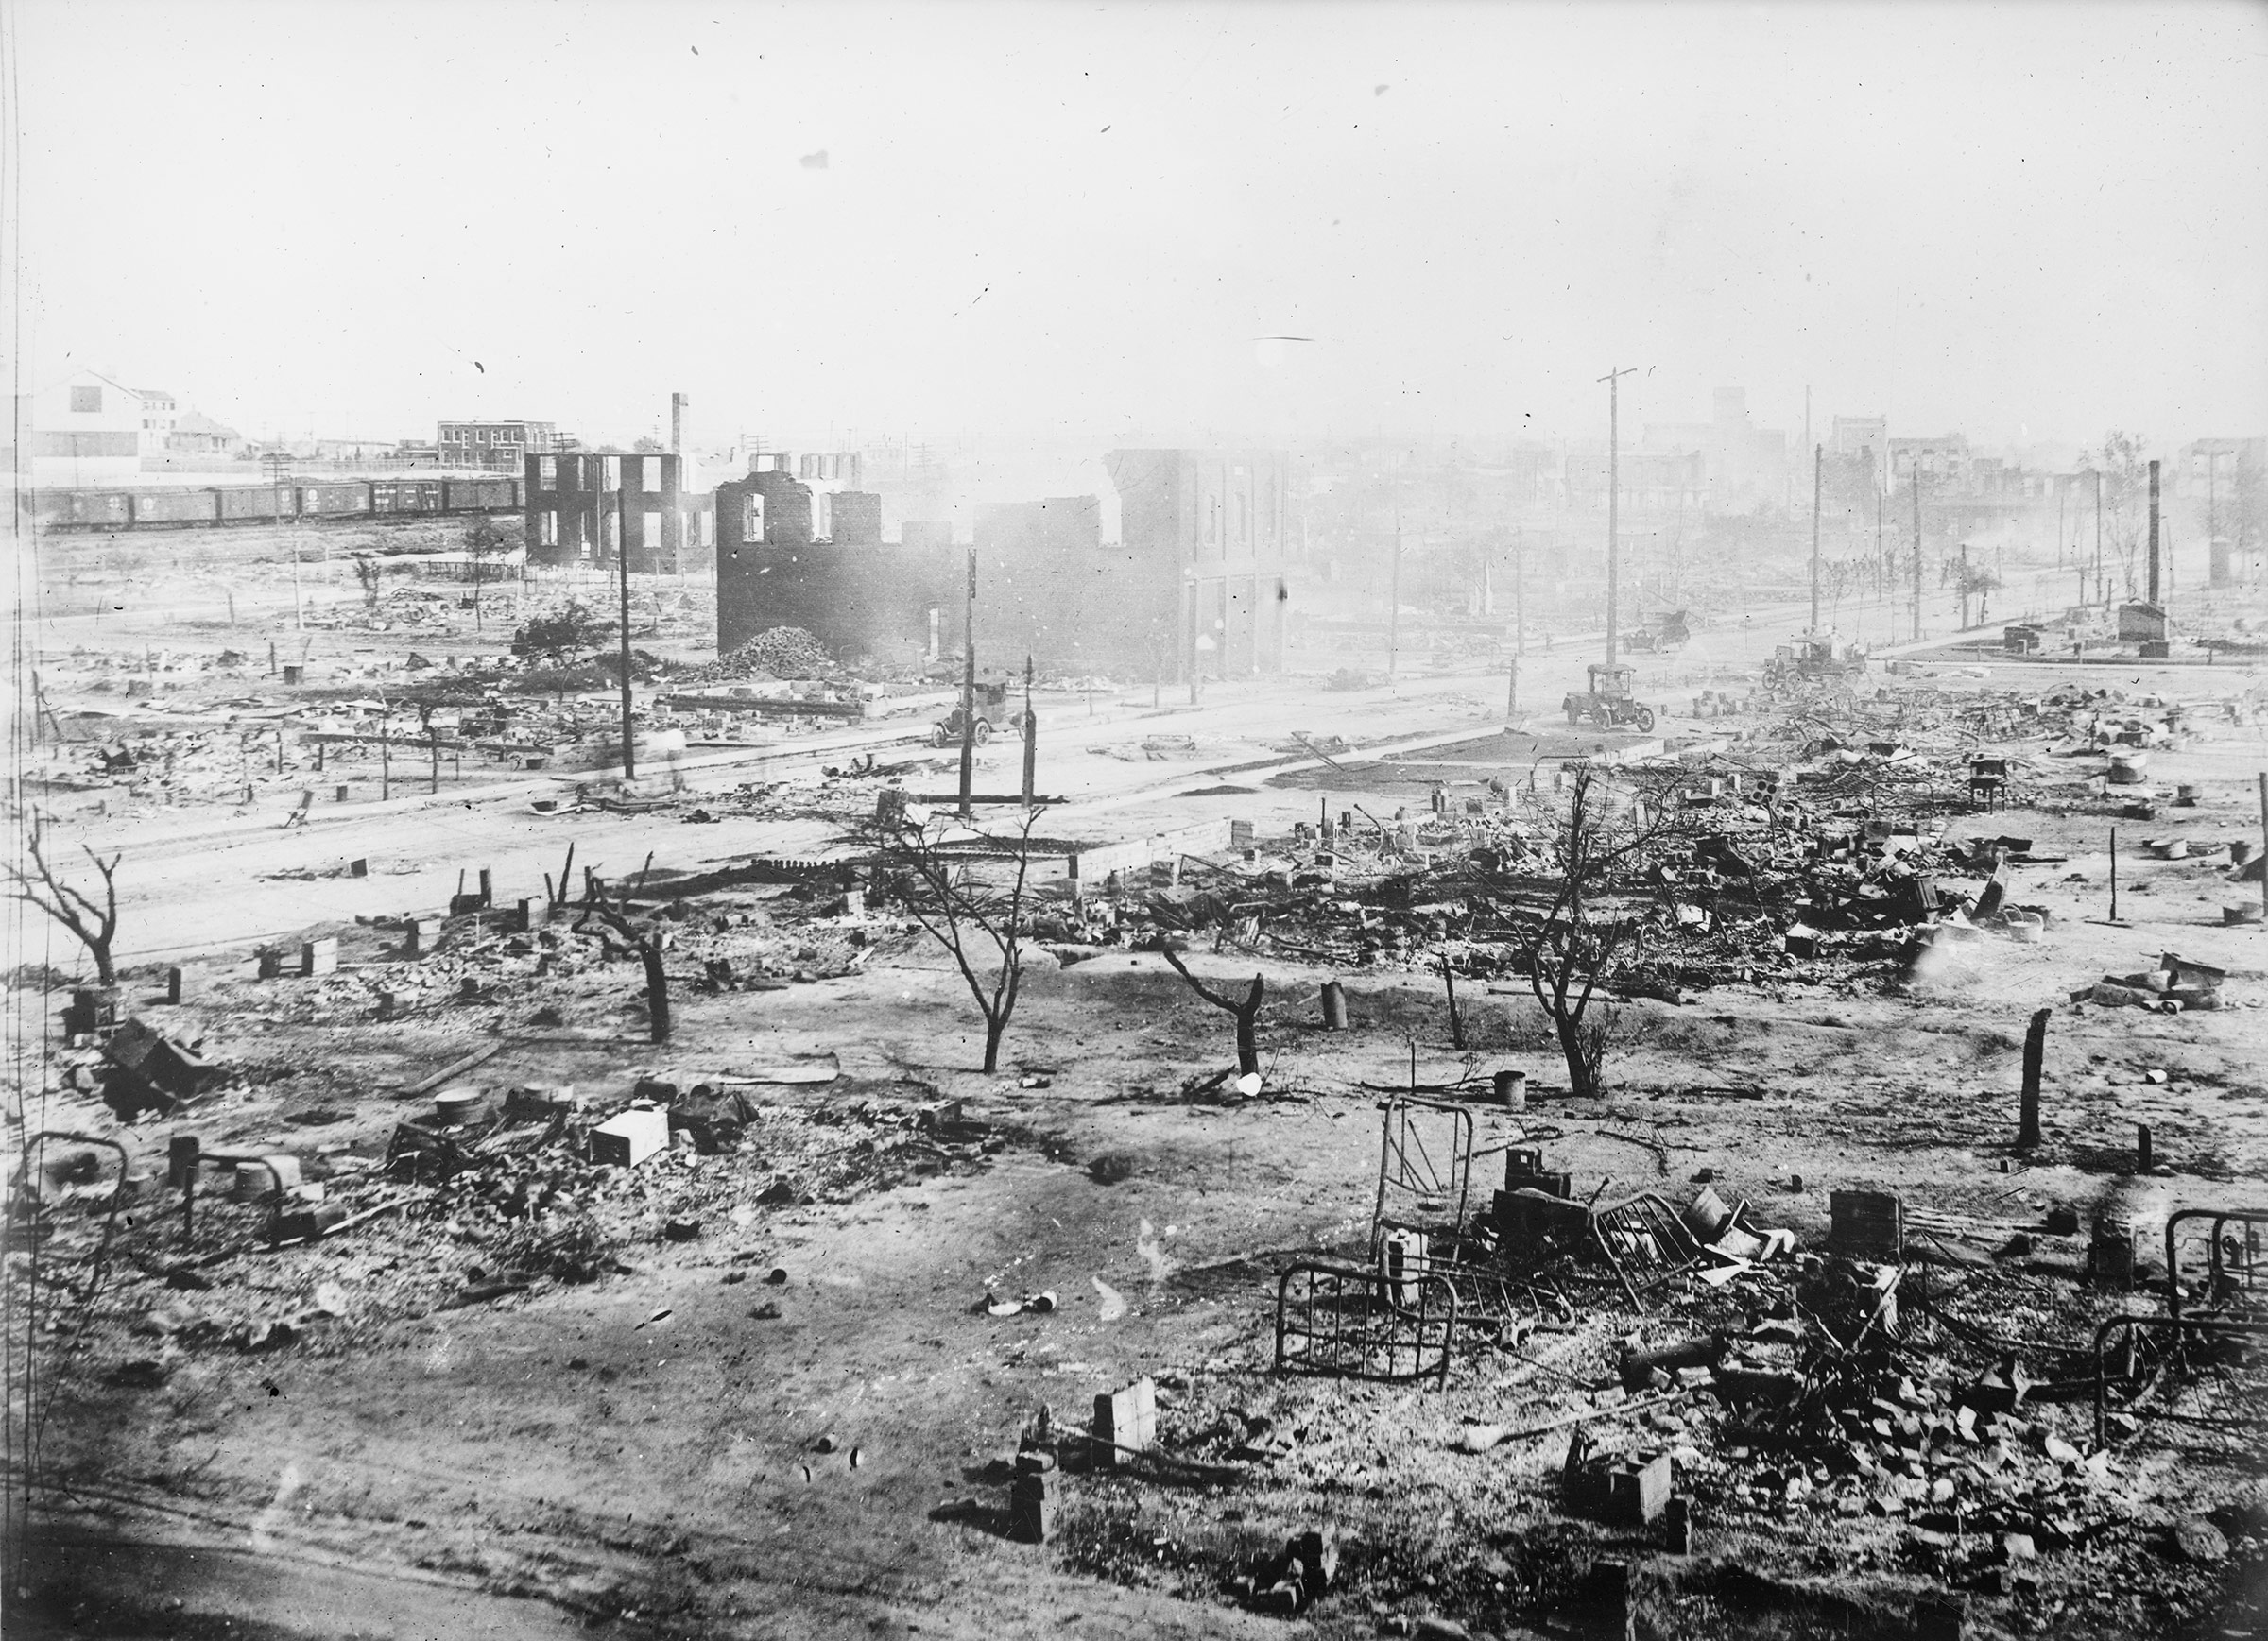 The Greenwood district of Tulsa in 1921, after the Tulsa Race Massacre. (Library of Congress)